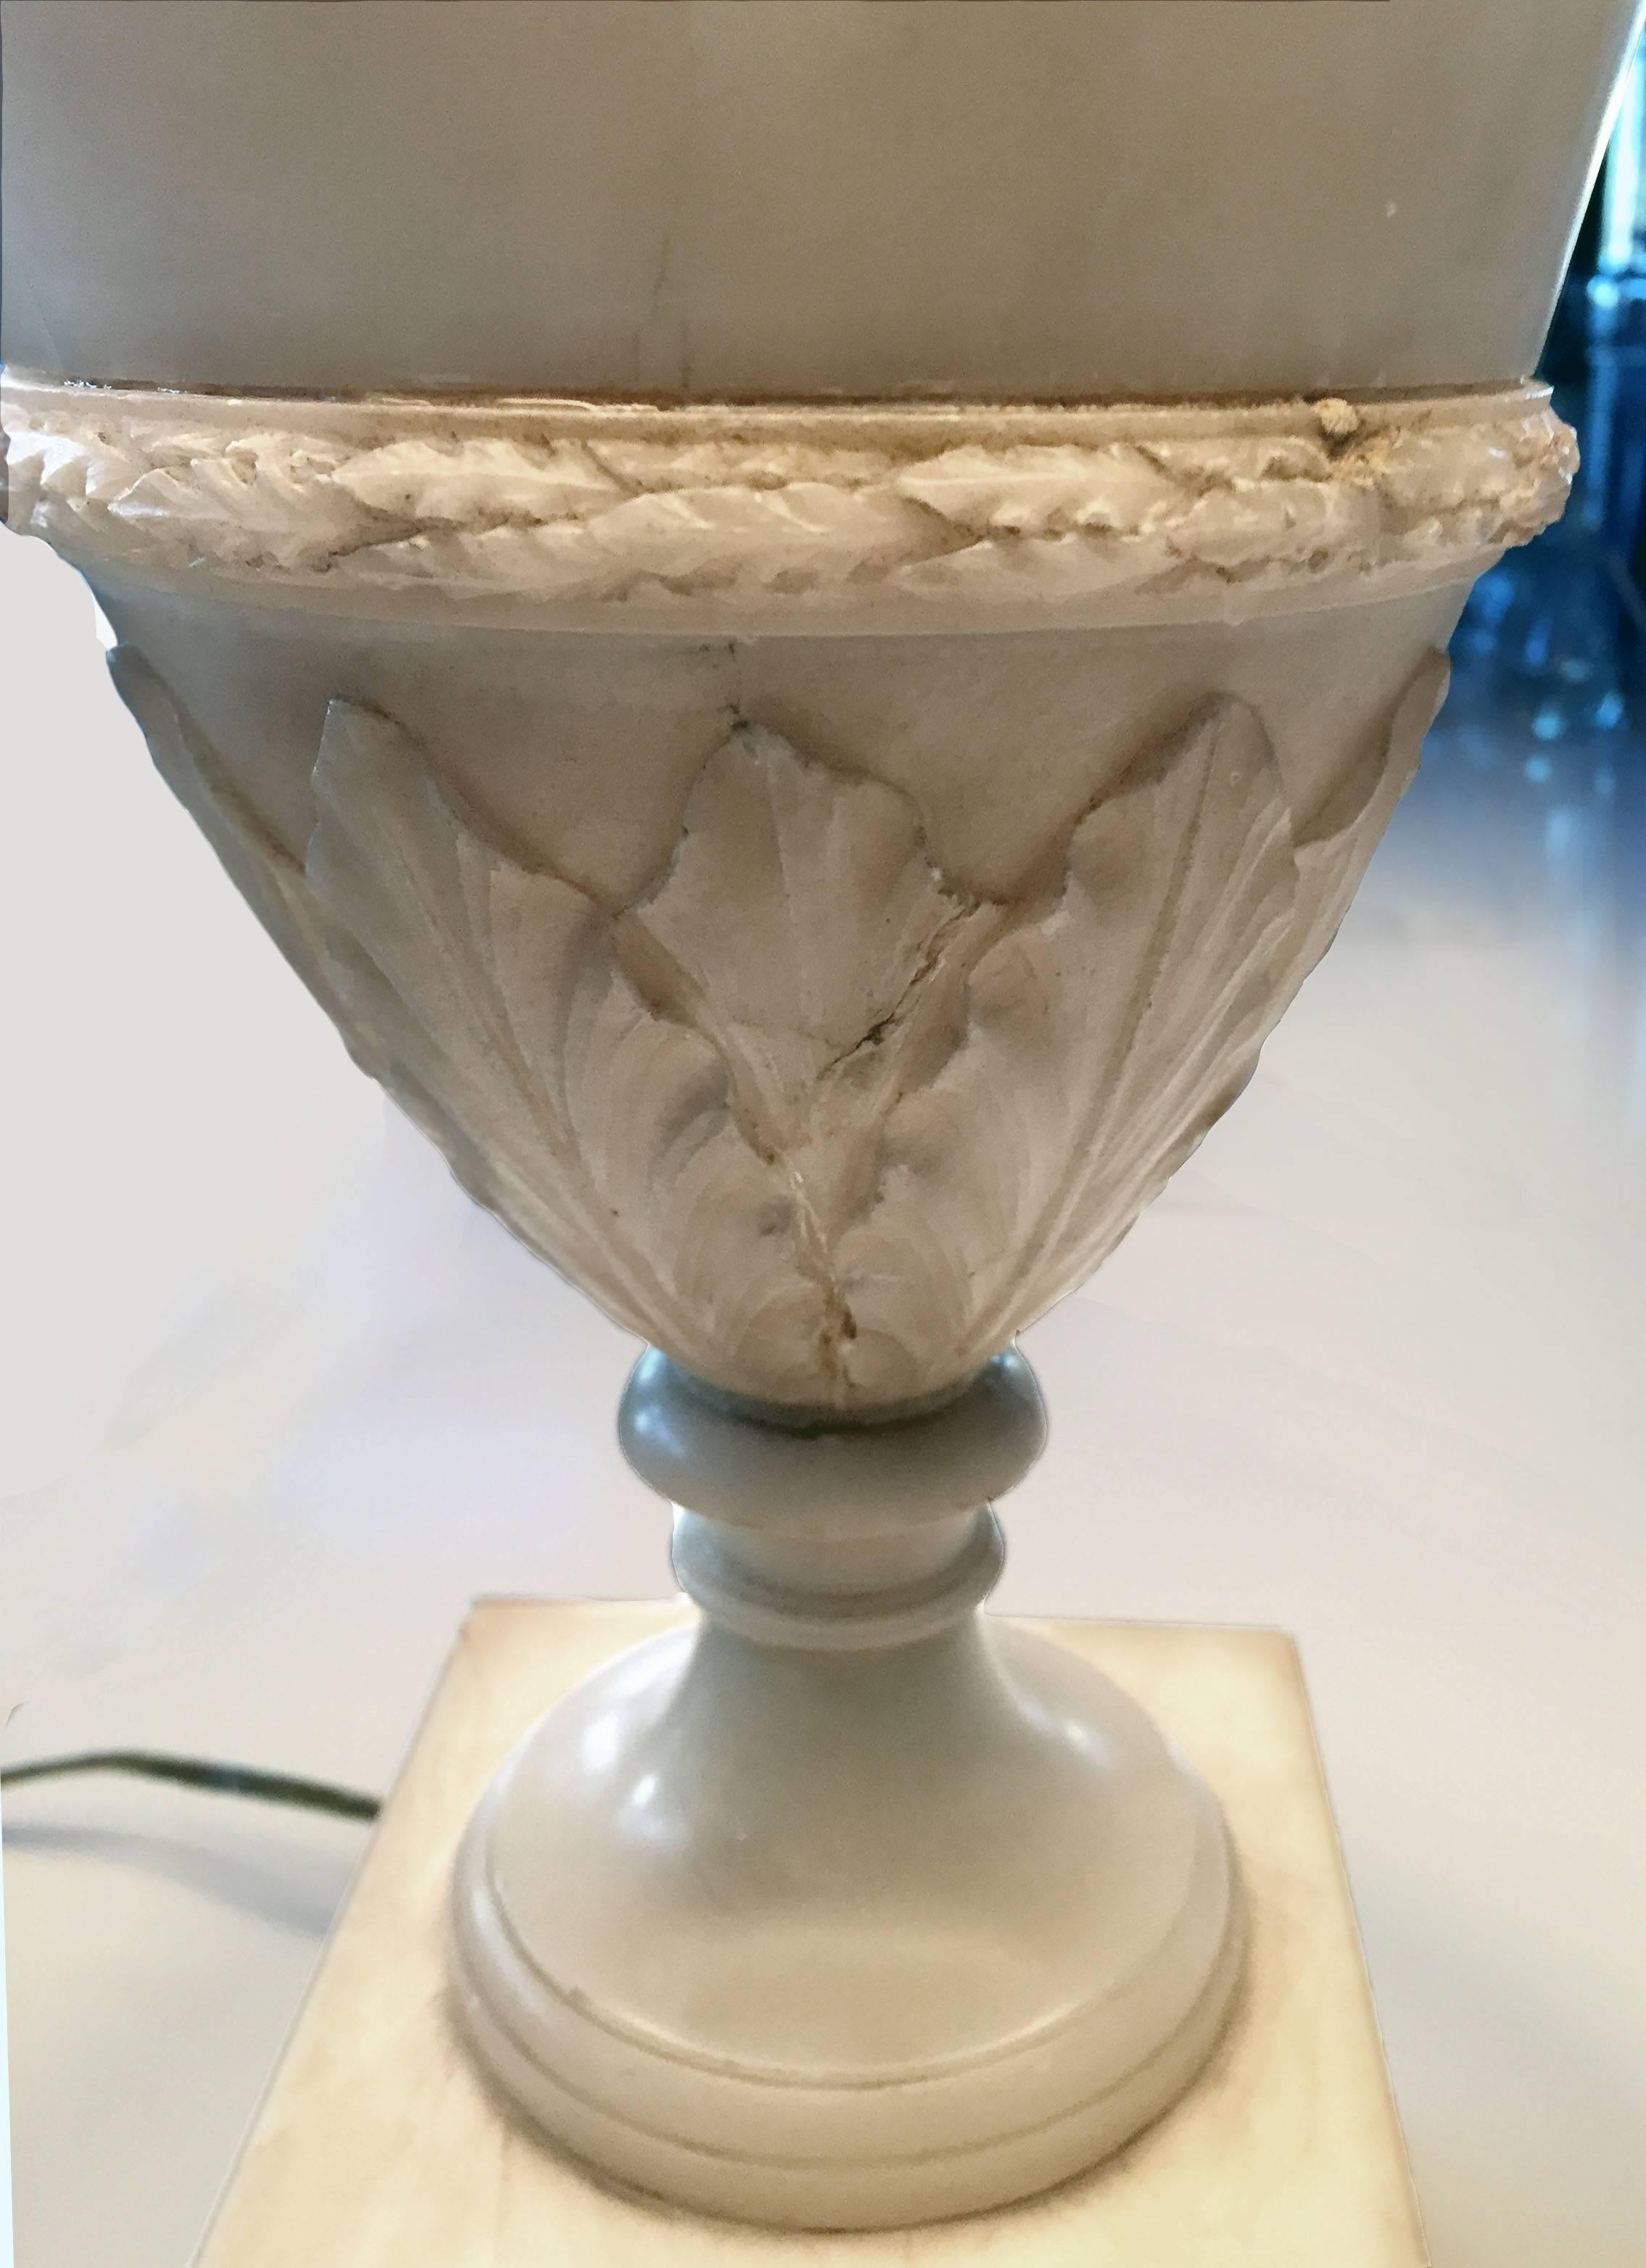 Late 19th century French alabaster lamp with custom trimmed silk shade. Hand-carved classic urn form with highly detailed carving of acanthus leaves and rosettes on double stepped base with gilding.
The shade is silk with custom trim. Completely